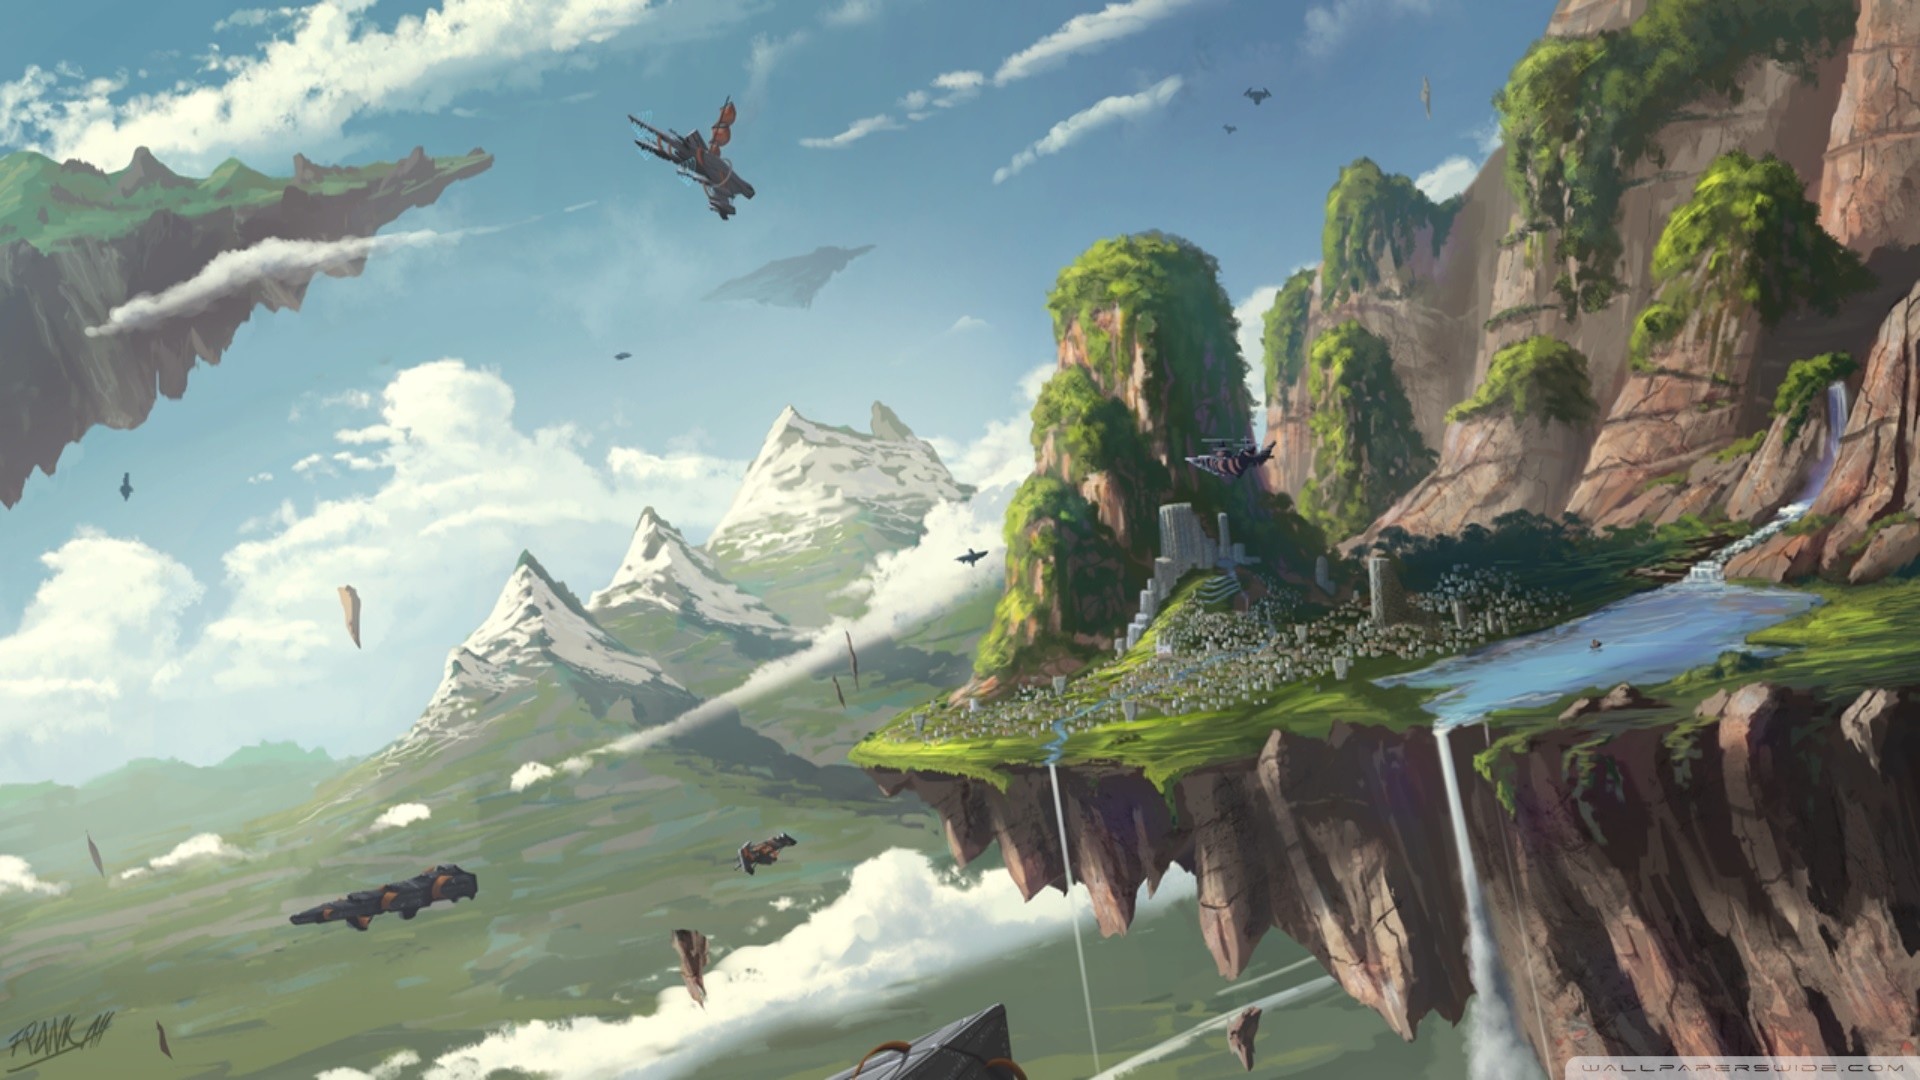 floating wallpaper,natural landscape,strategy video game,sky,pc game,terrain